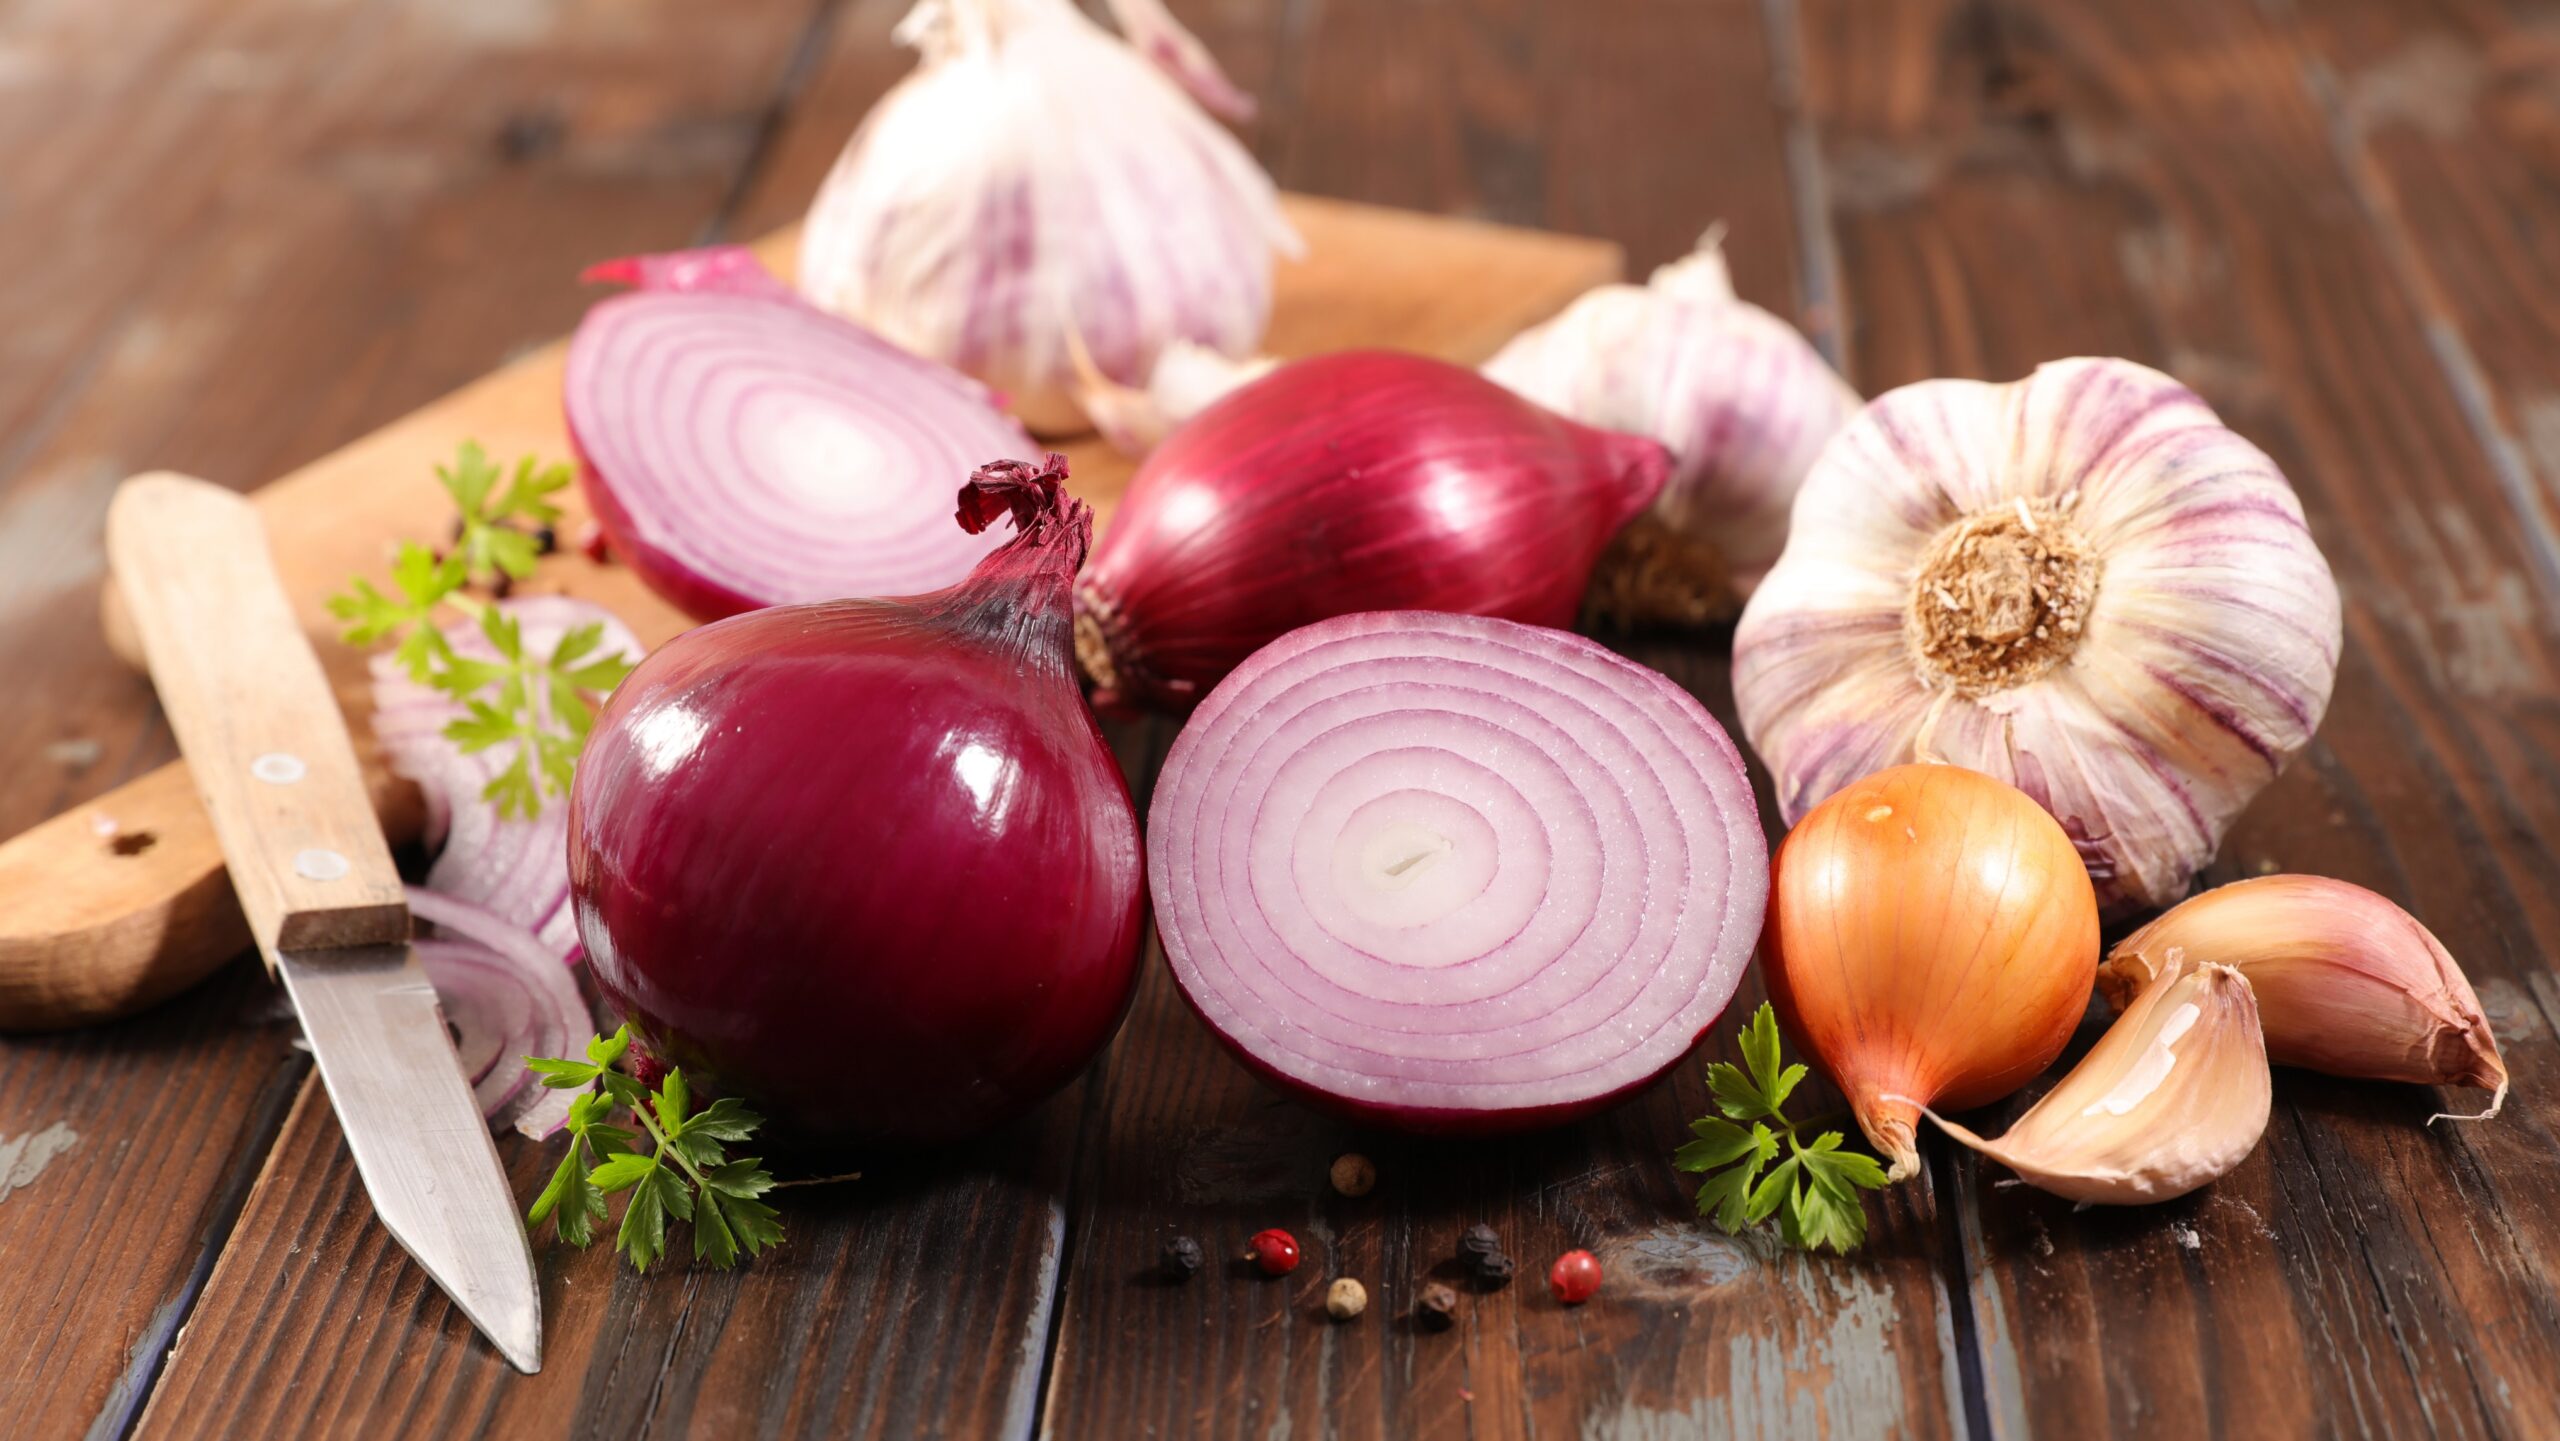 Onions And Garlic May Lower The Risk Of Breast Cancer